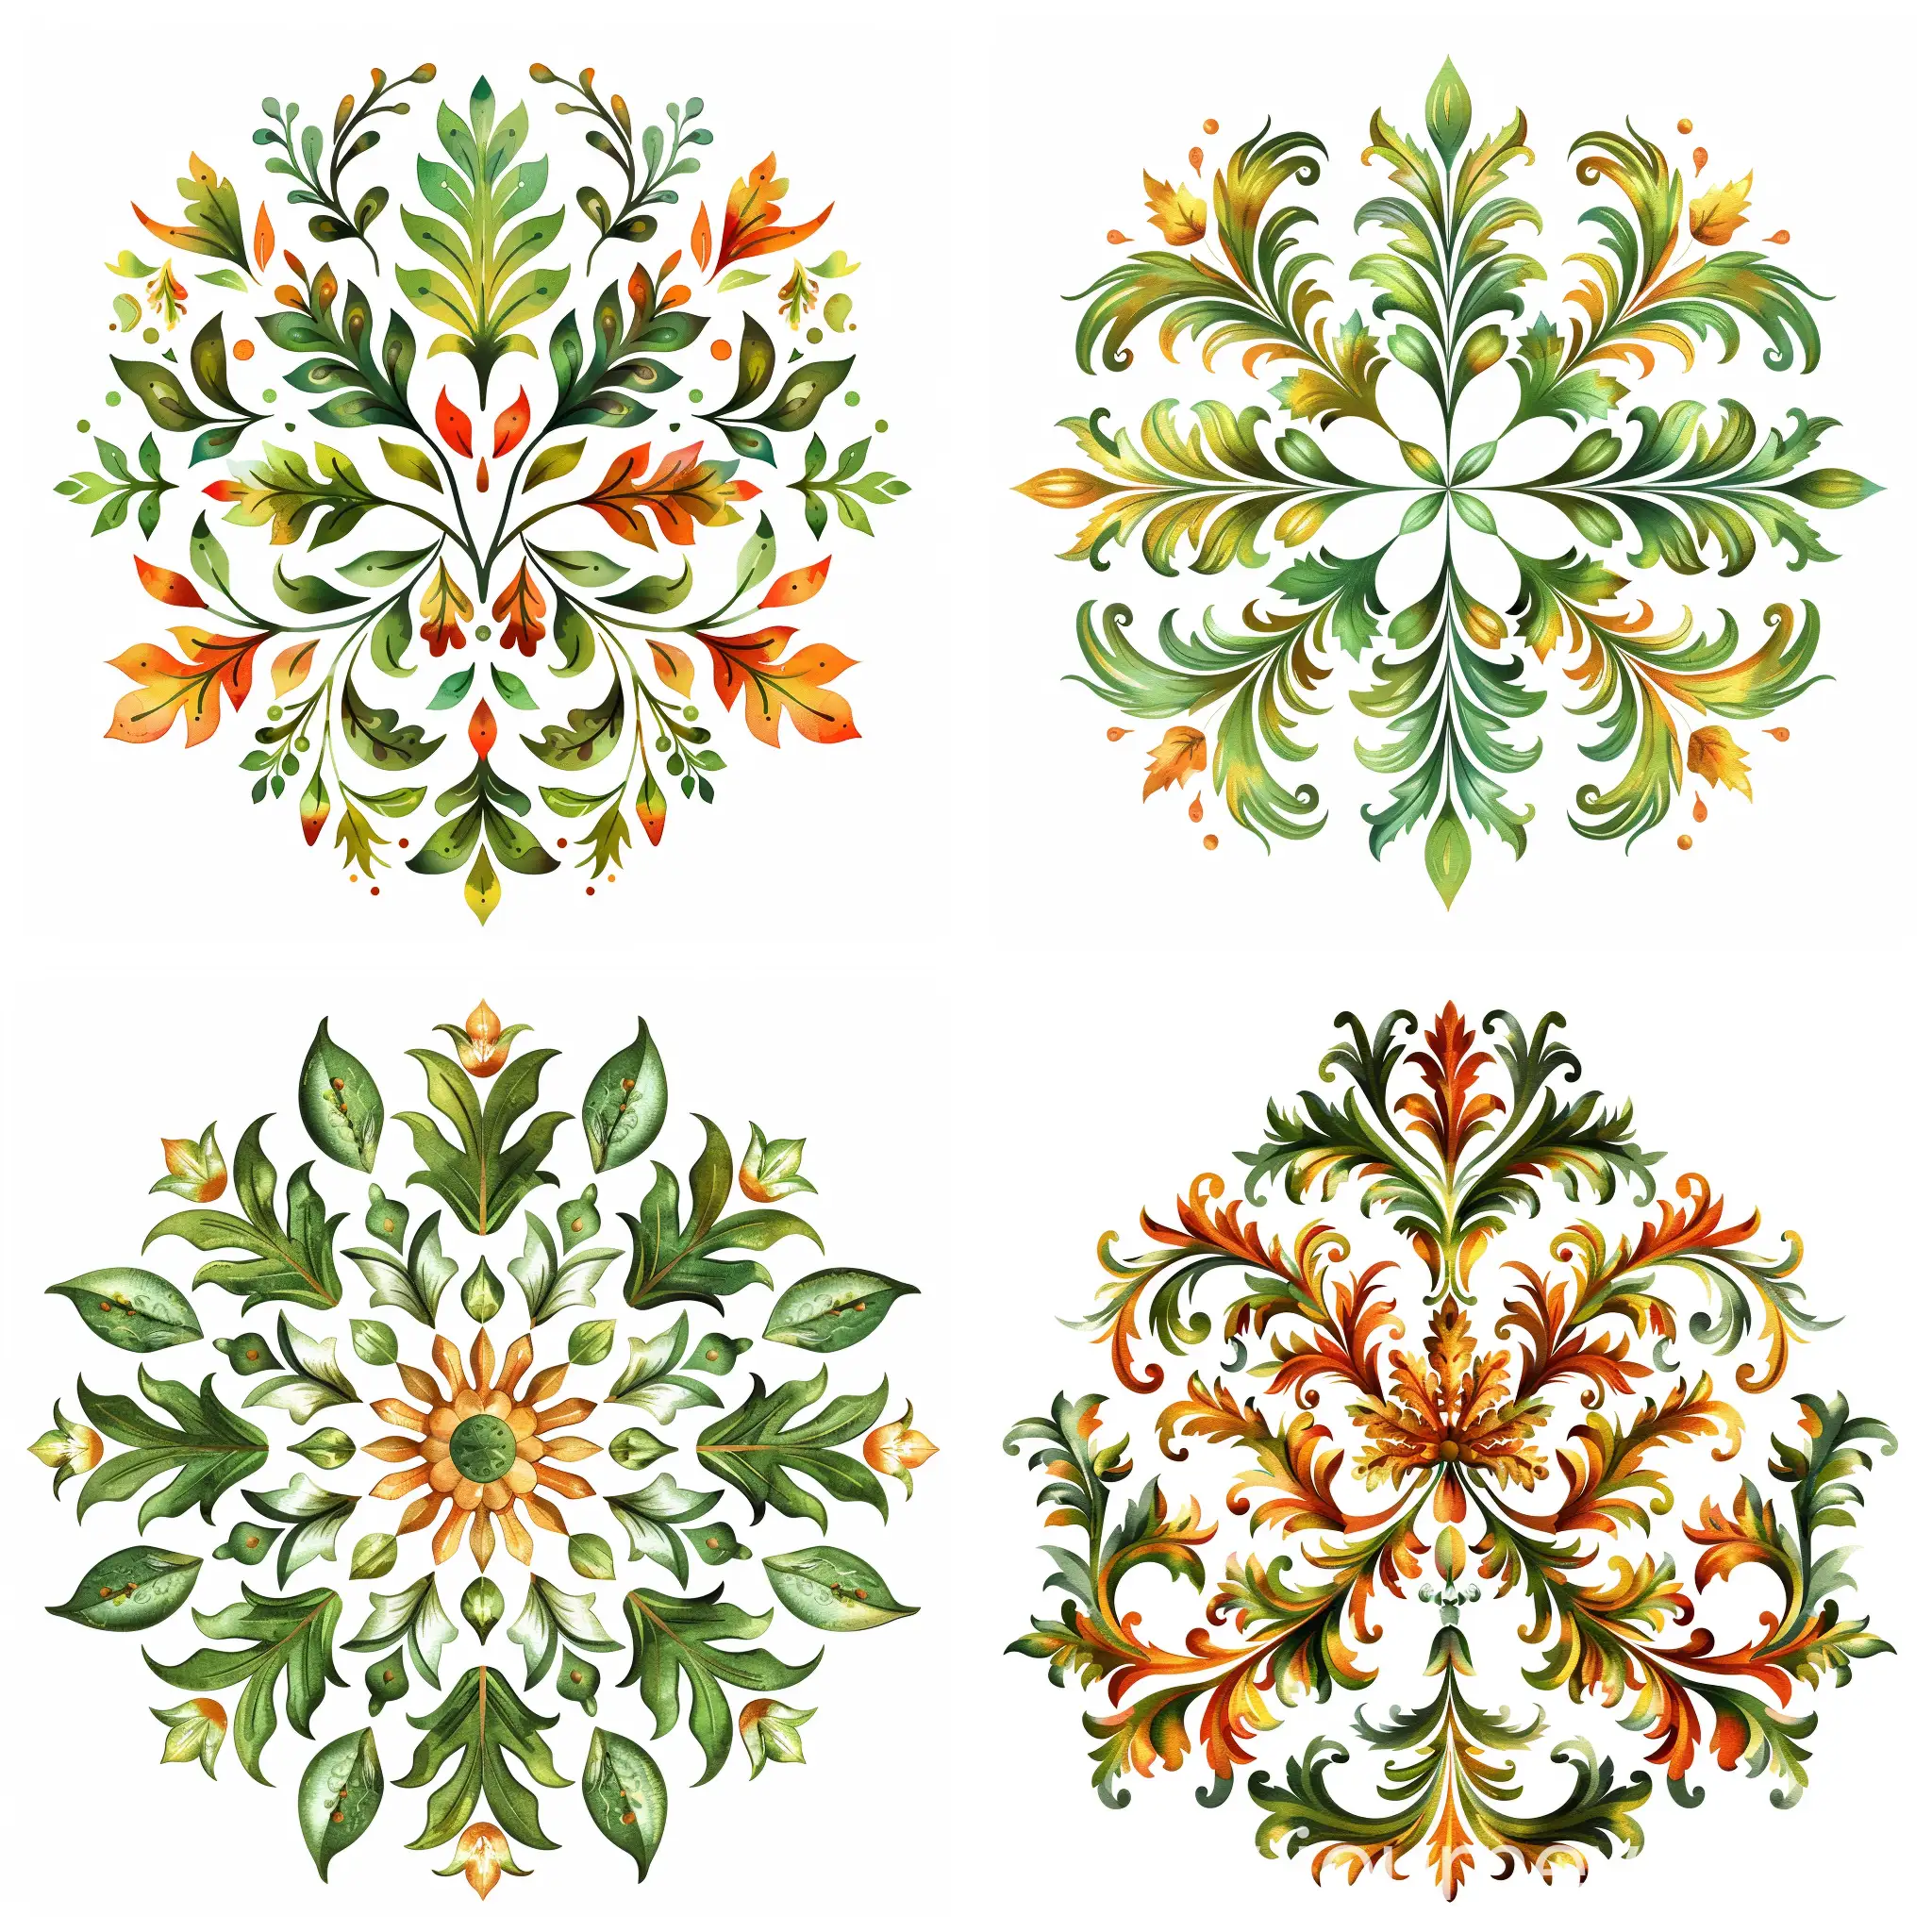 Cheerful-Vector-Watercolor-Ornament-with-Autumn-Motifs-in-Baroque-Style